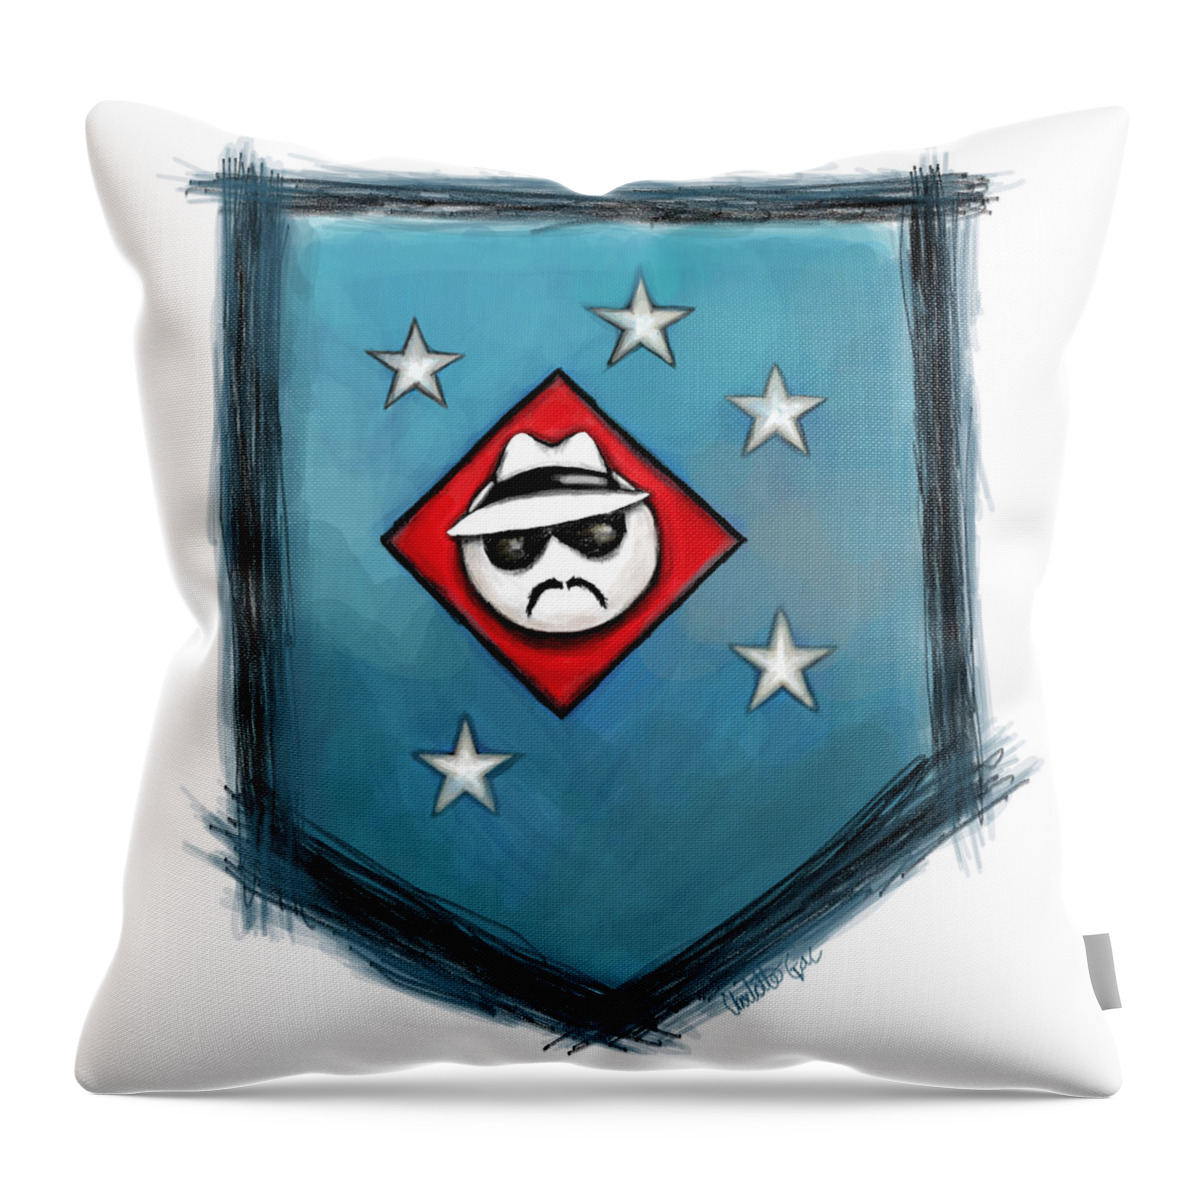  Throw Pillow featuring the mixed media Low Low Raider by Charlotte Gac